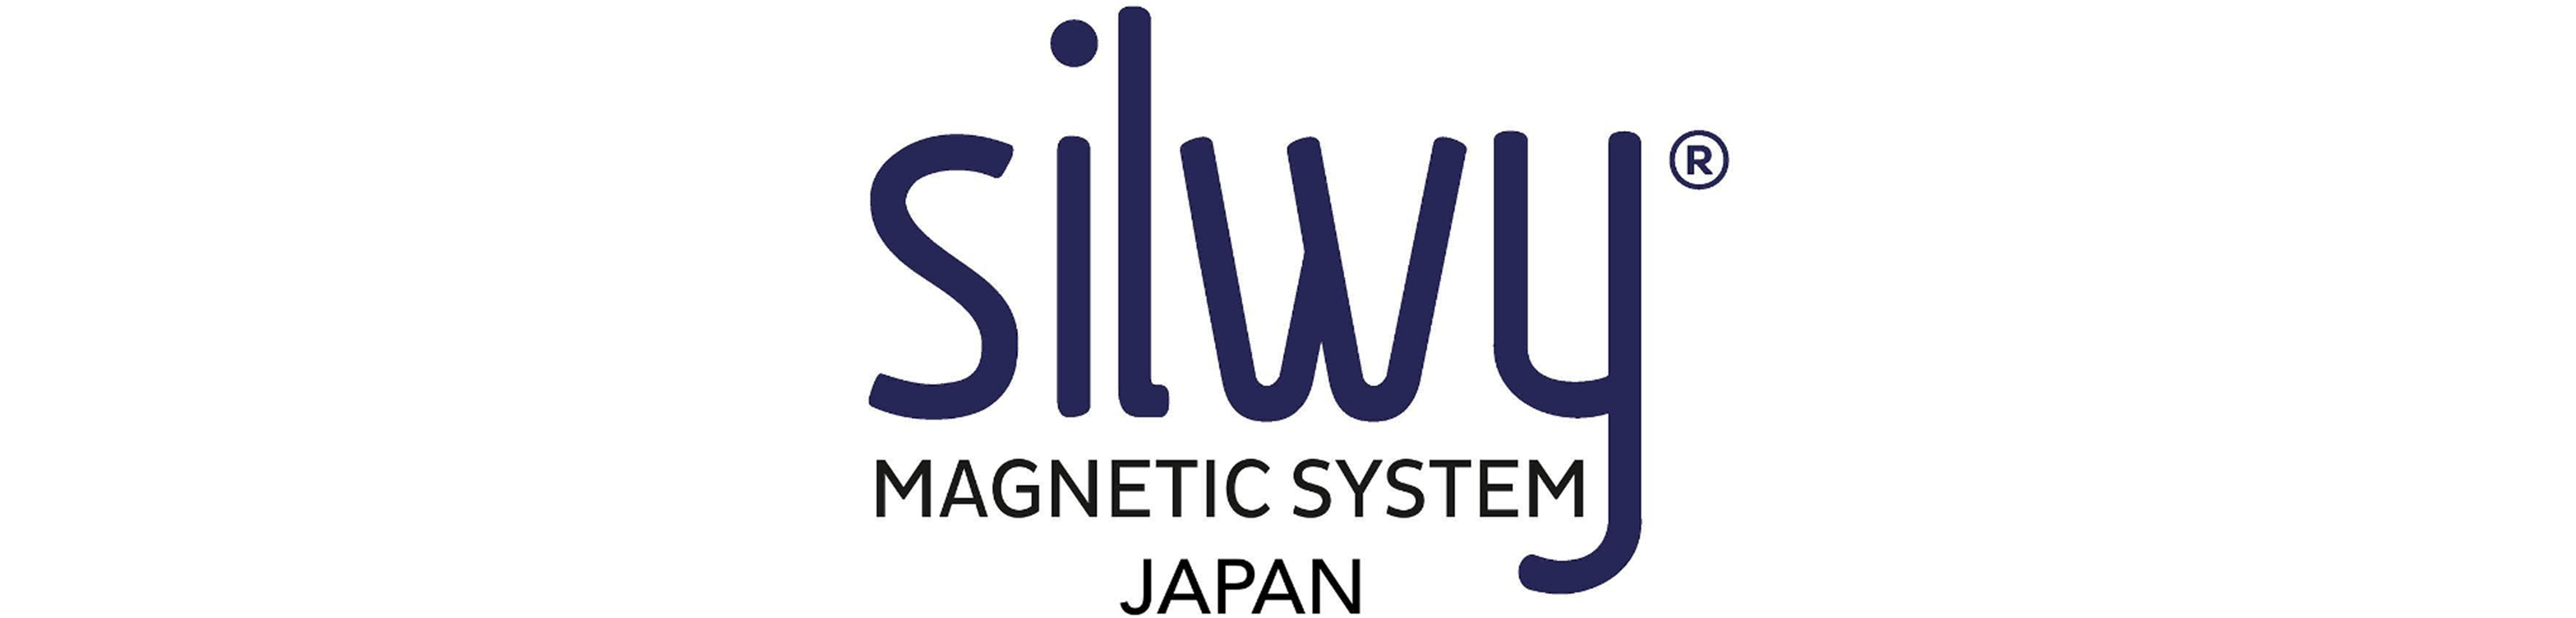 silwy® MAGNETIC SYSTEM JAPAN - Stars Japan Trading